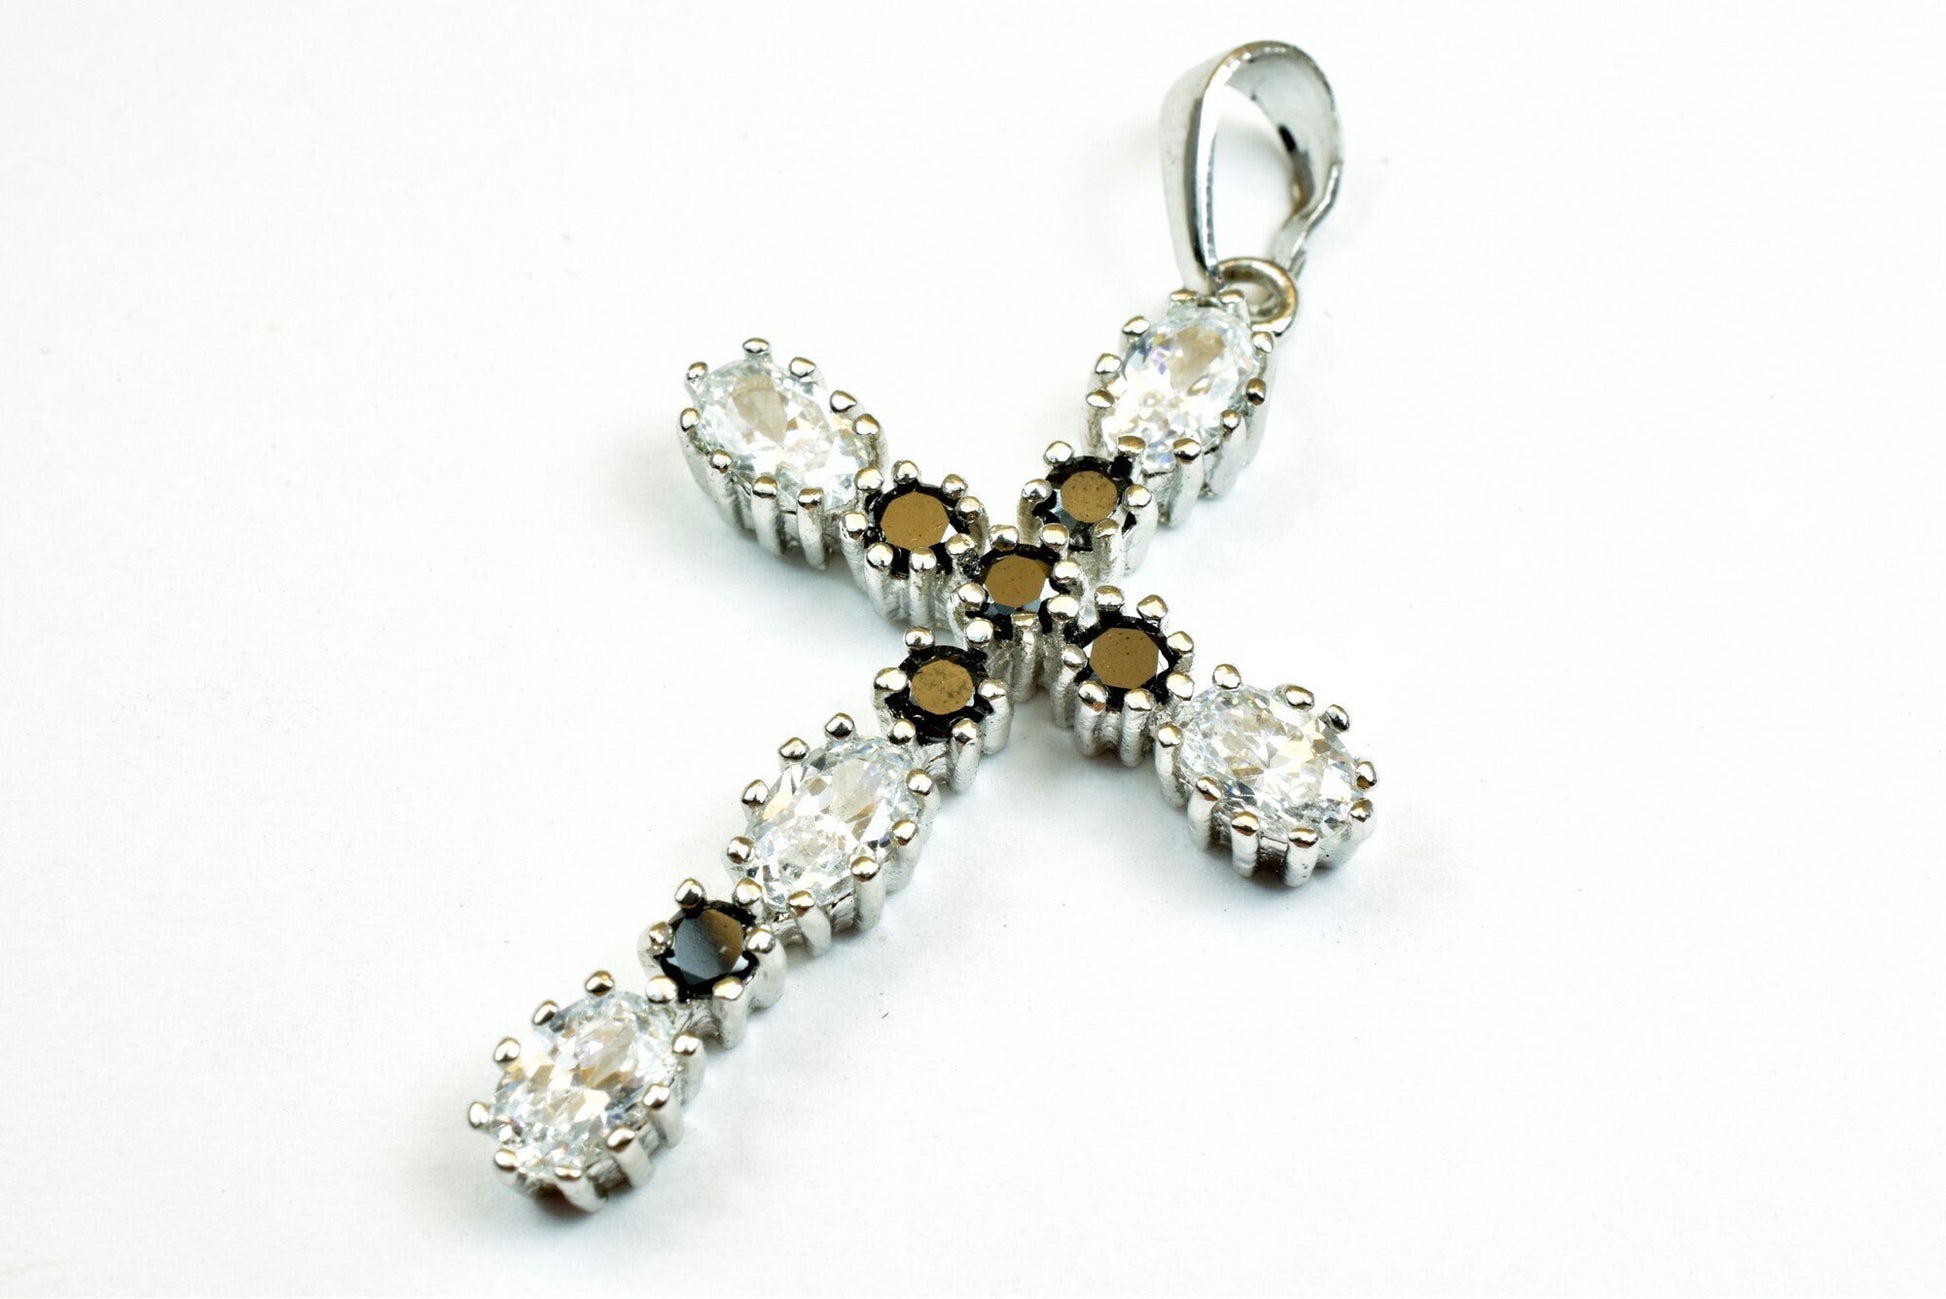 White gold filled cross pendant, black clear cz cubic zircon rhinestone rhodium plated charm size 39x20mm thickness 4.5mm for jewelry making